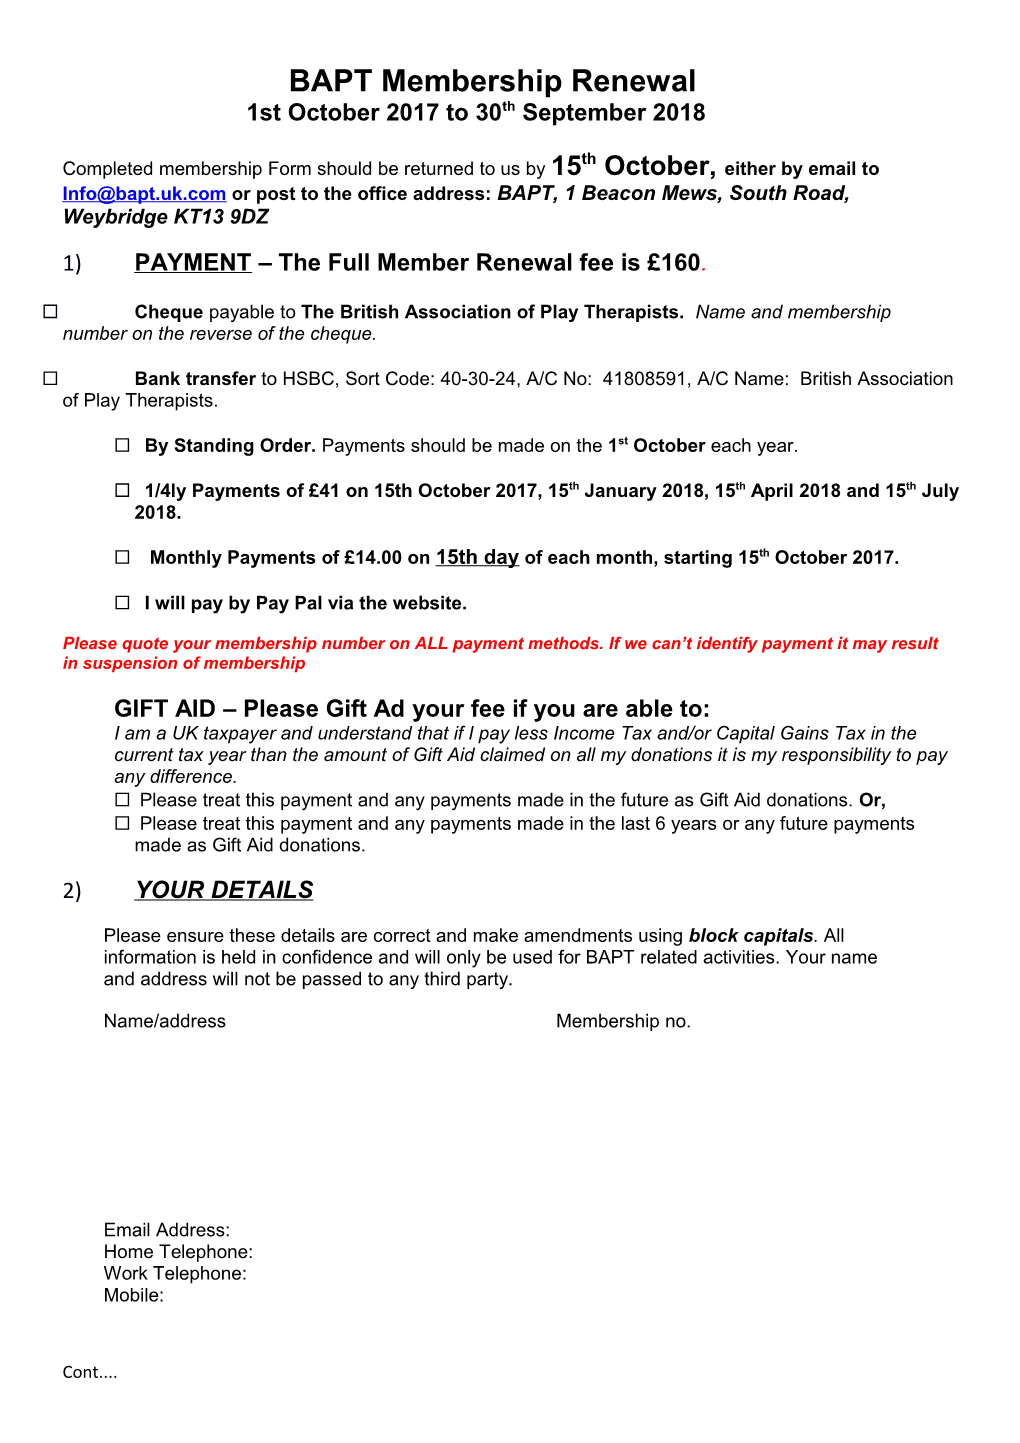 1)PAYMENT the Full Member Renewal Fee Is 160